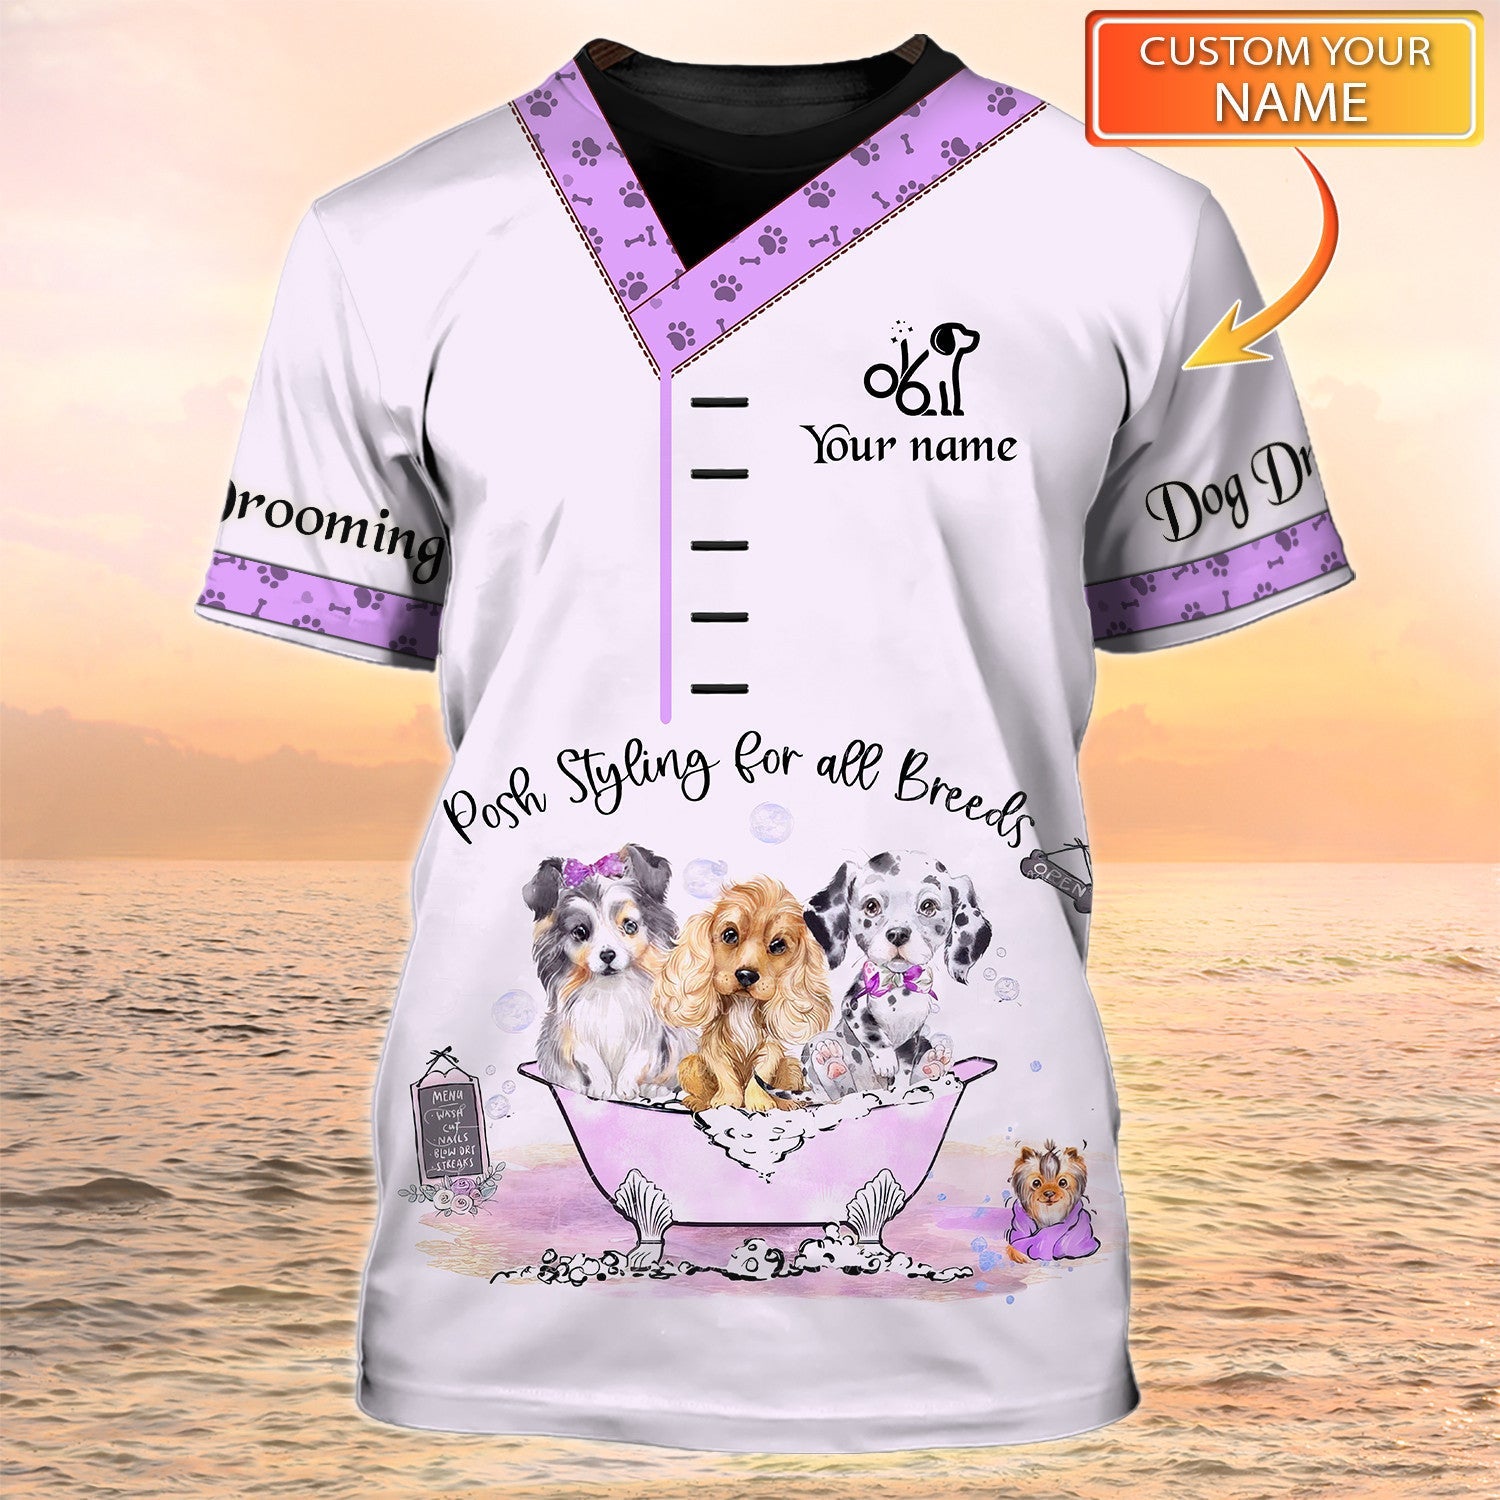 Dog Grooming Shirt Pets Grooming Uniform Posh Styling For All Breeds